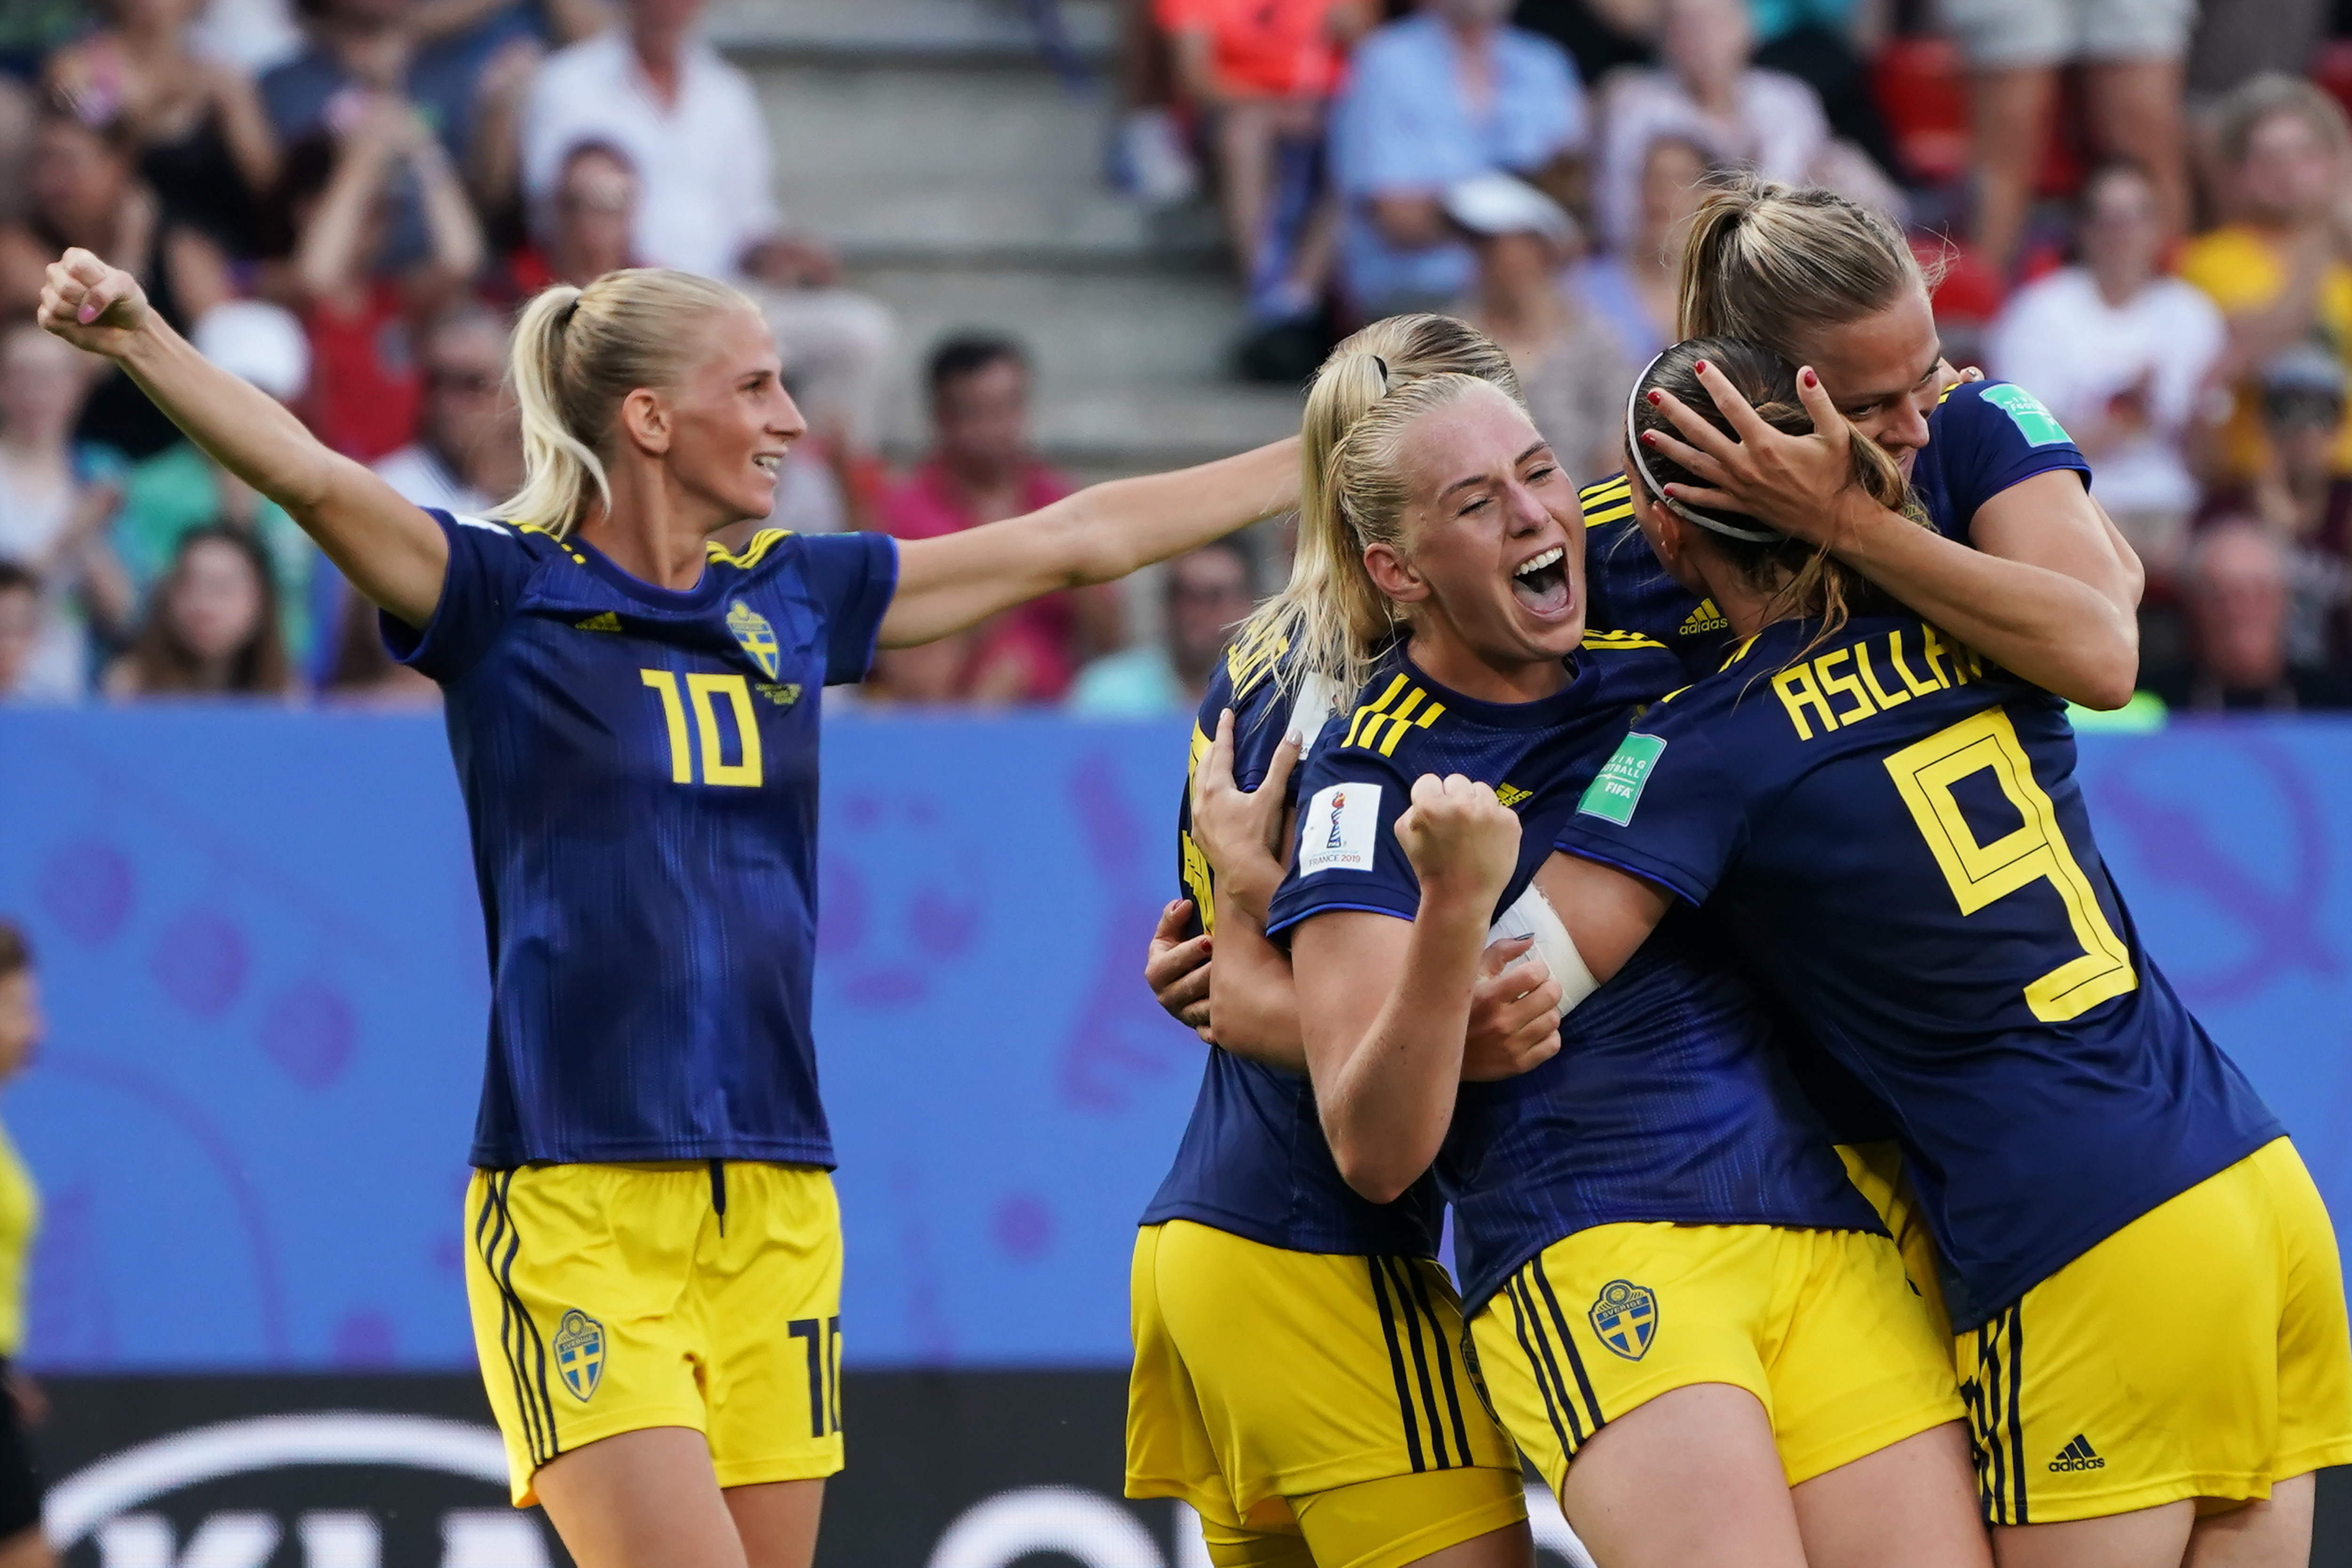 epa07683541 Stina Blackstenius of Sweden celebrates with teammate after scoring a goal during the Quarter Final match between Germany and Sweden at the FIFA Women's World Cup 2019 in Rennes, France, 29 June 2019.  EPA/EDDY LEMAISTRE